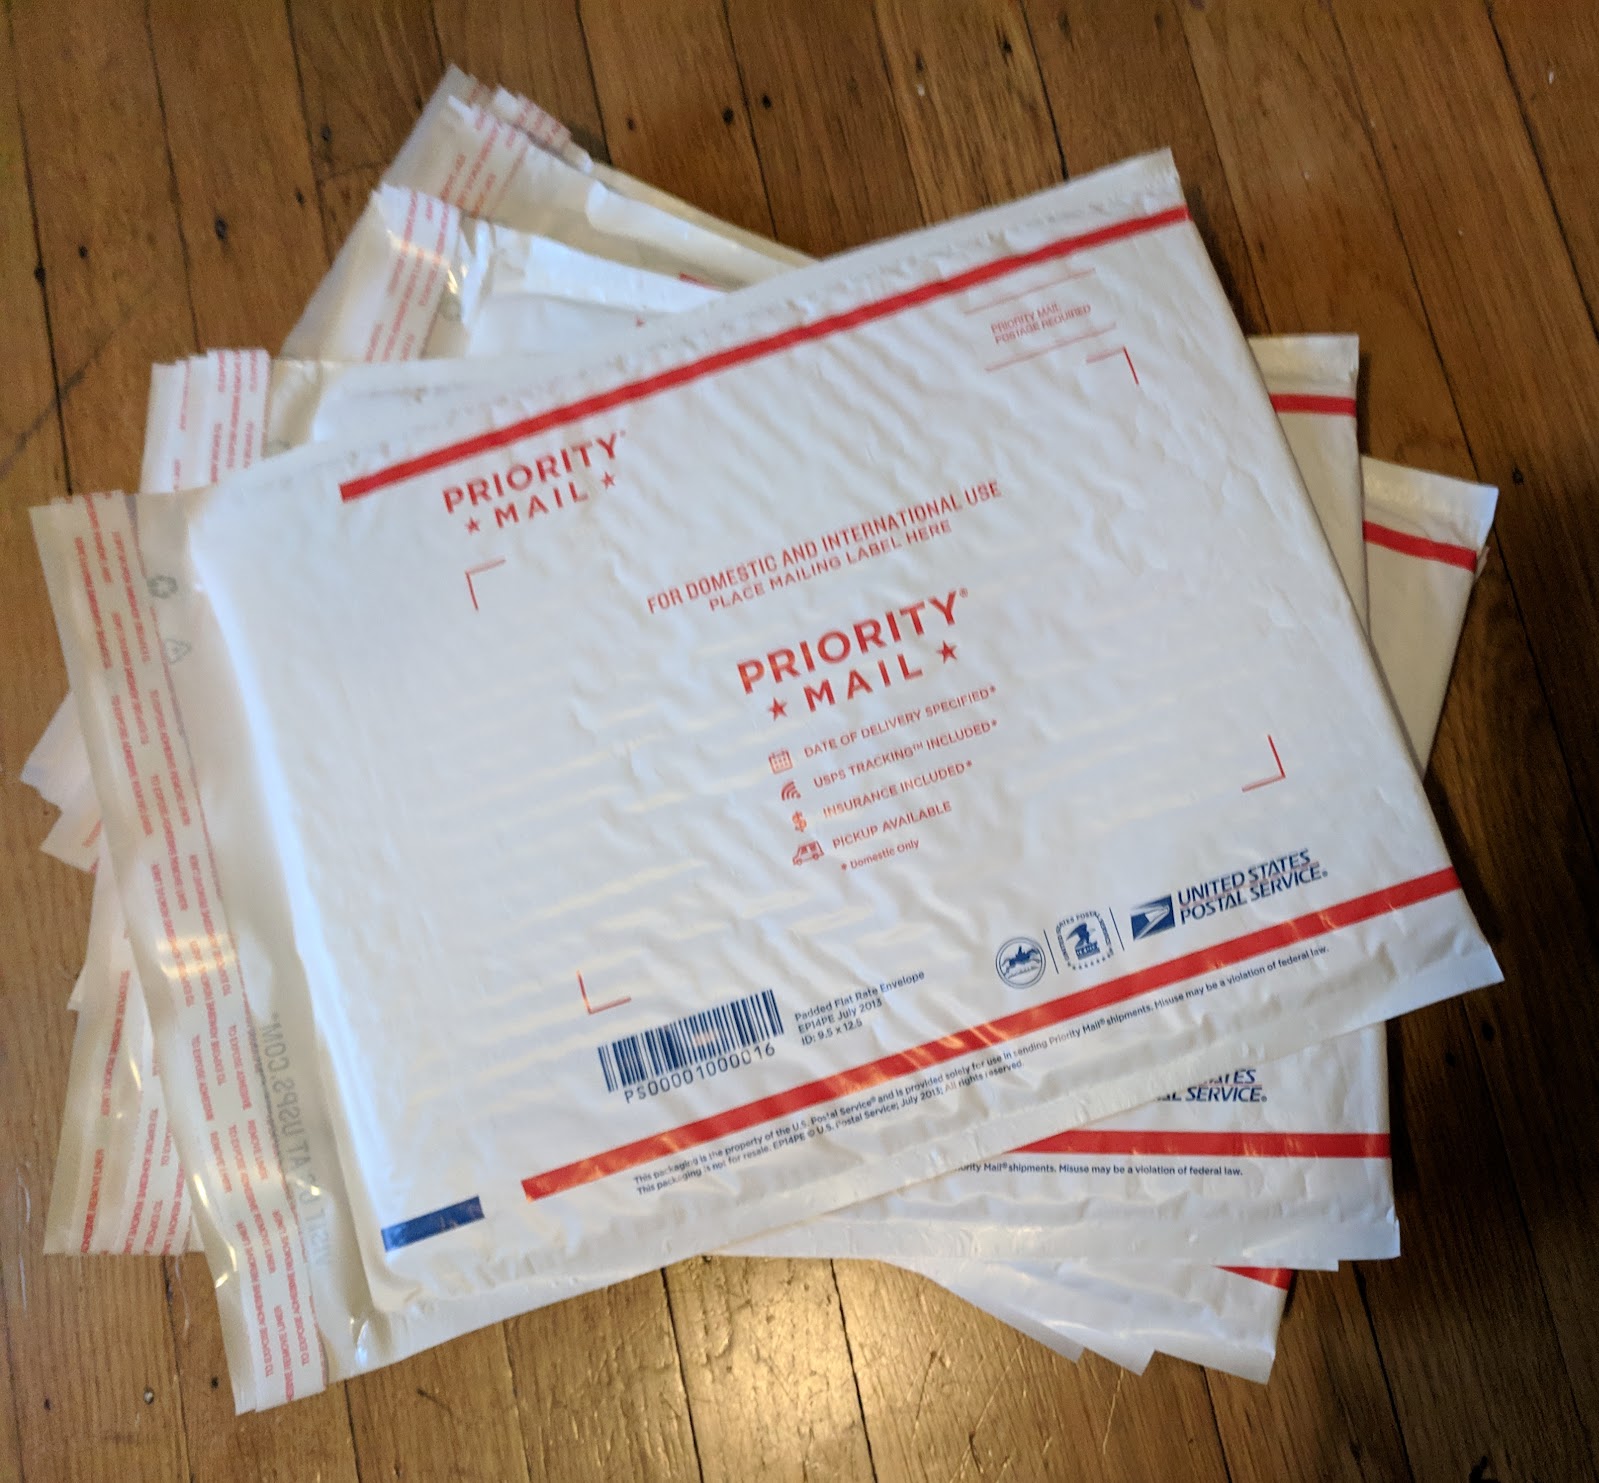 Can You Reuse A Priority Mail Box For Ups Baseball Card Breakdown The Definitive Guide To Shipping Sports Cards Safely And Cheaply